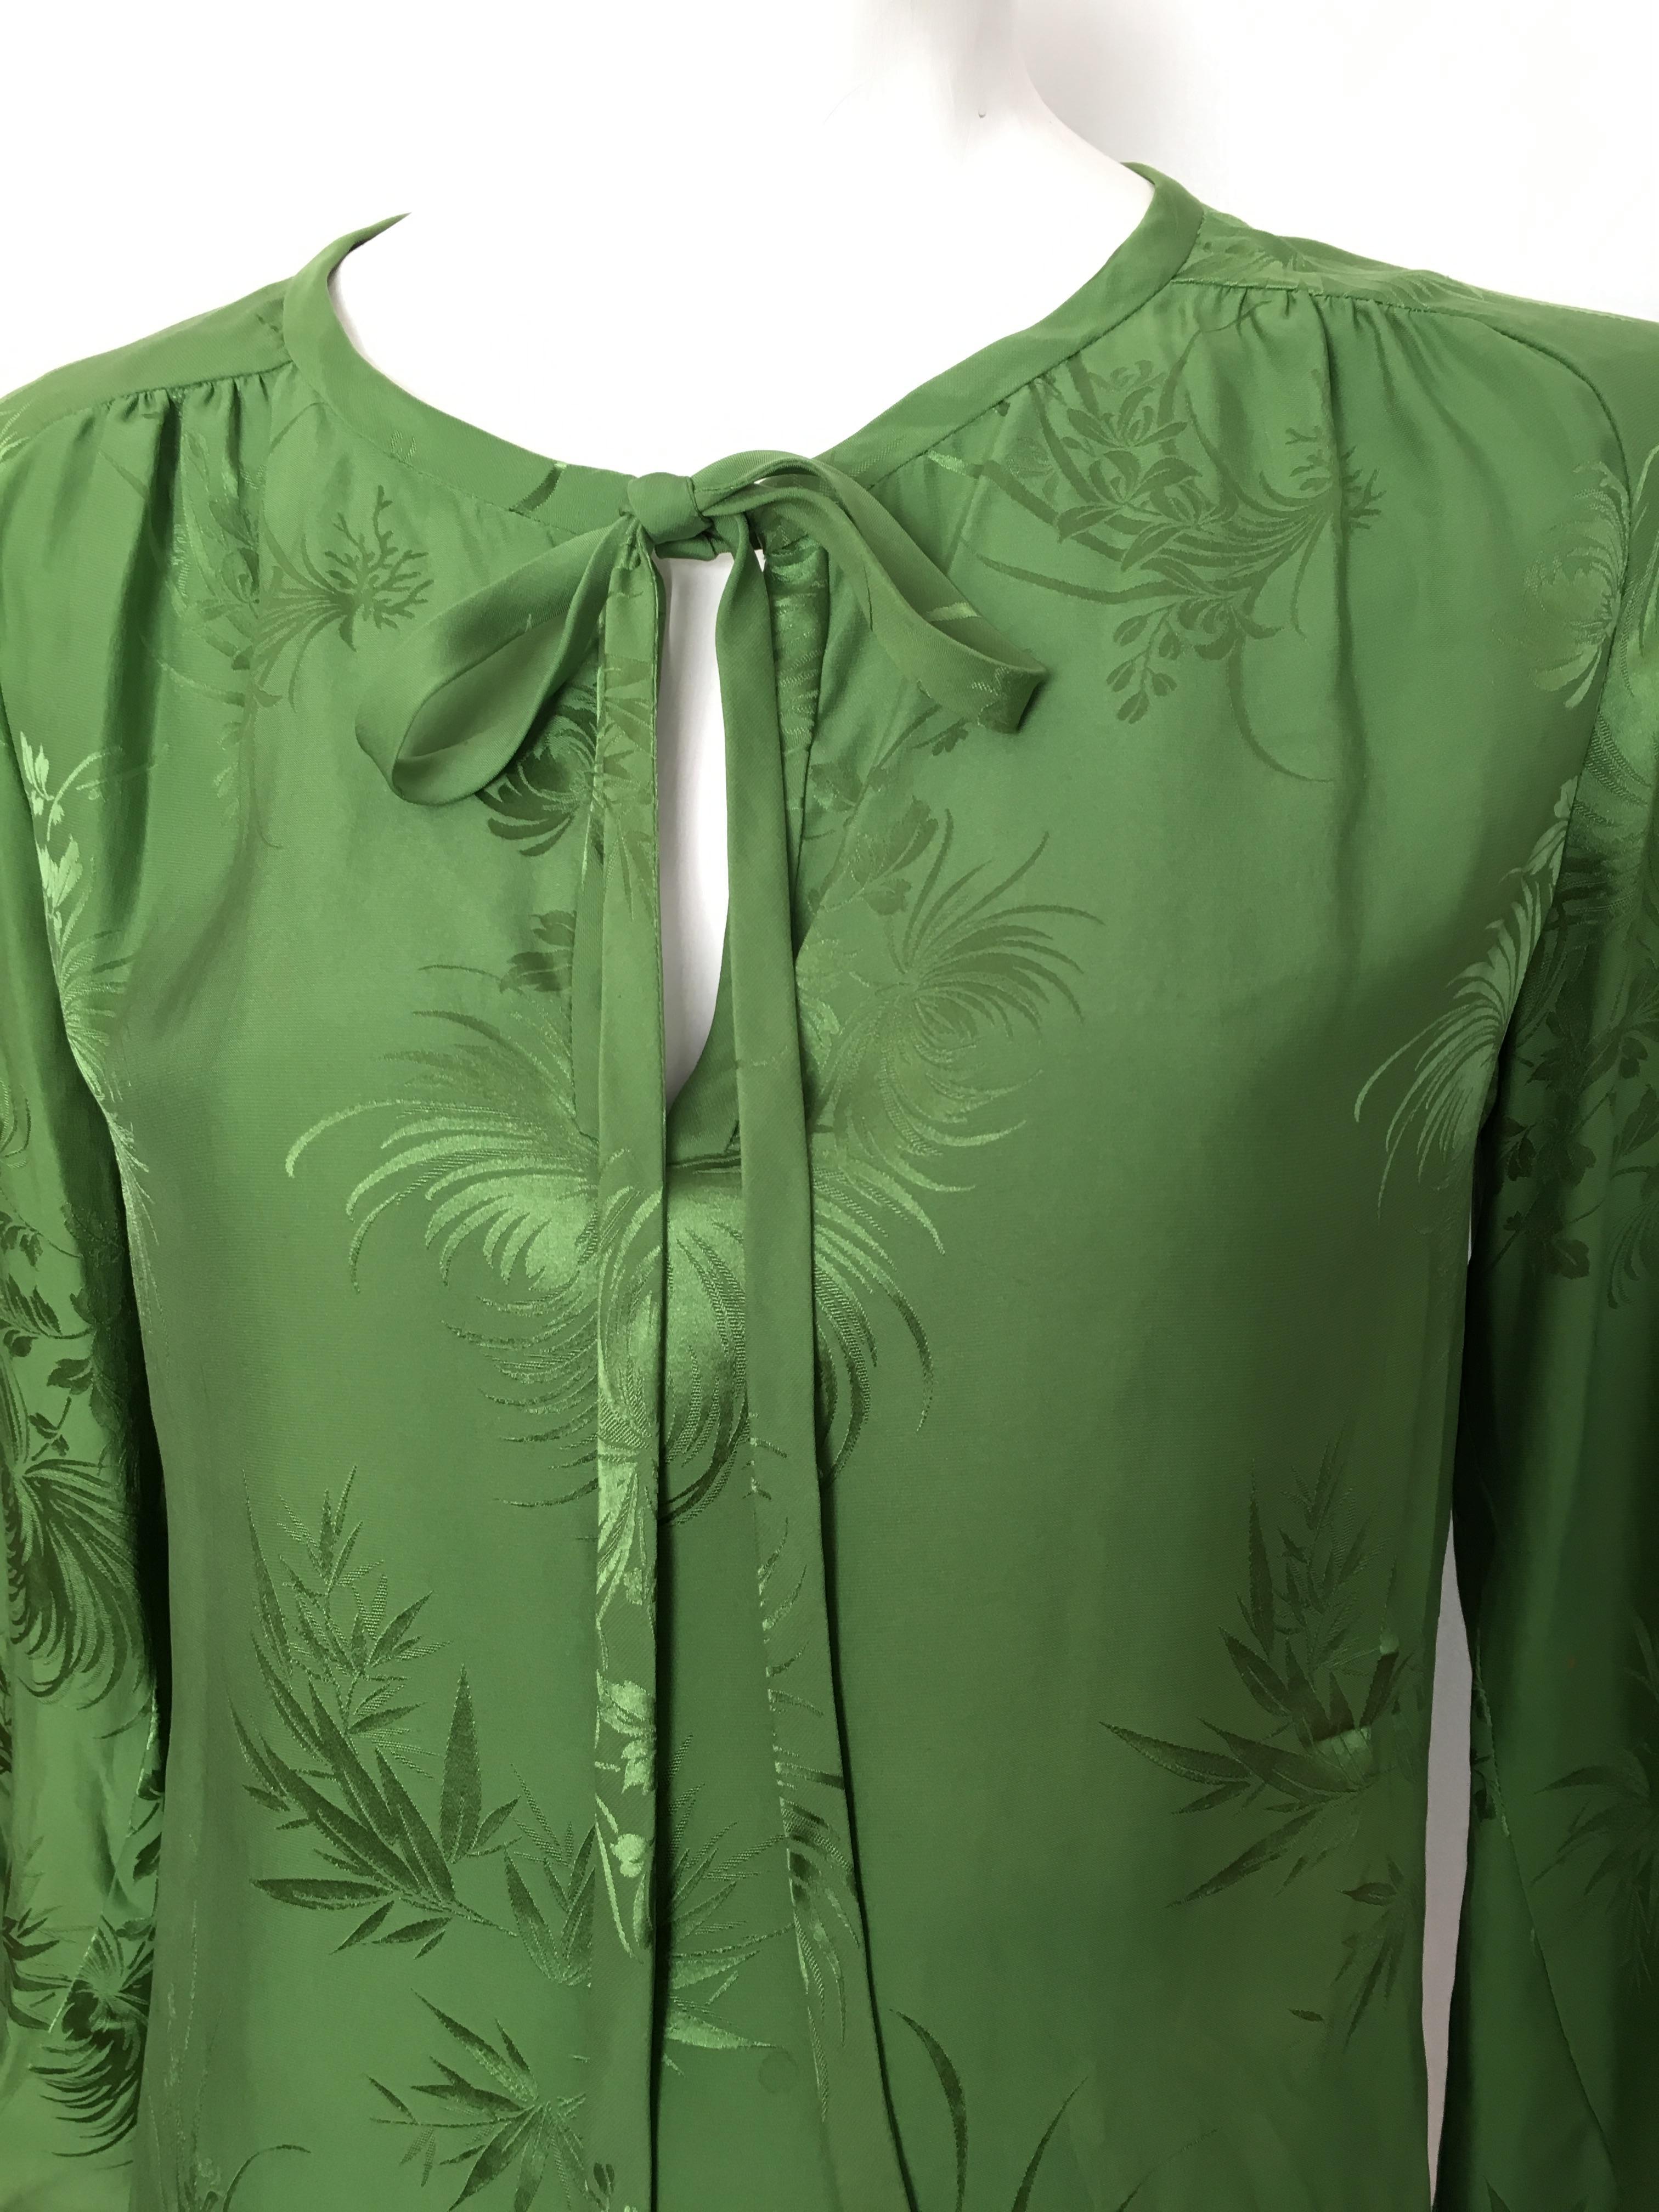 Malcolm Starr 1970s Green Silk Long Sleeve Blouse Size 6/8. In Good Condition For Sale In Atlanta, GA